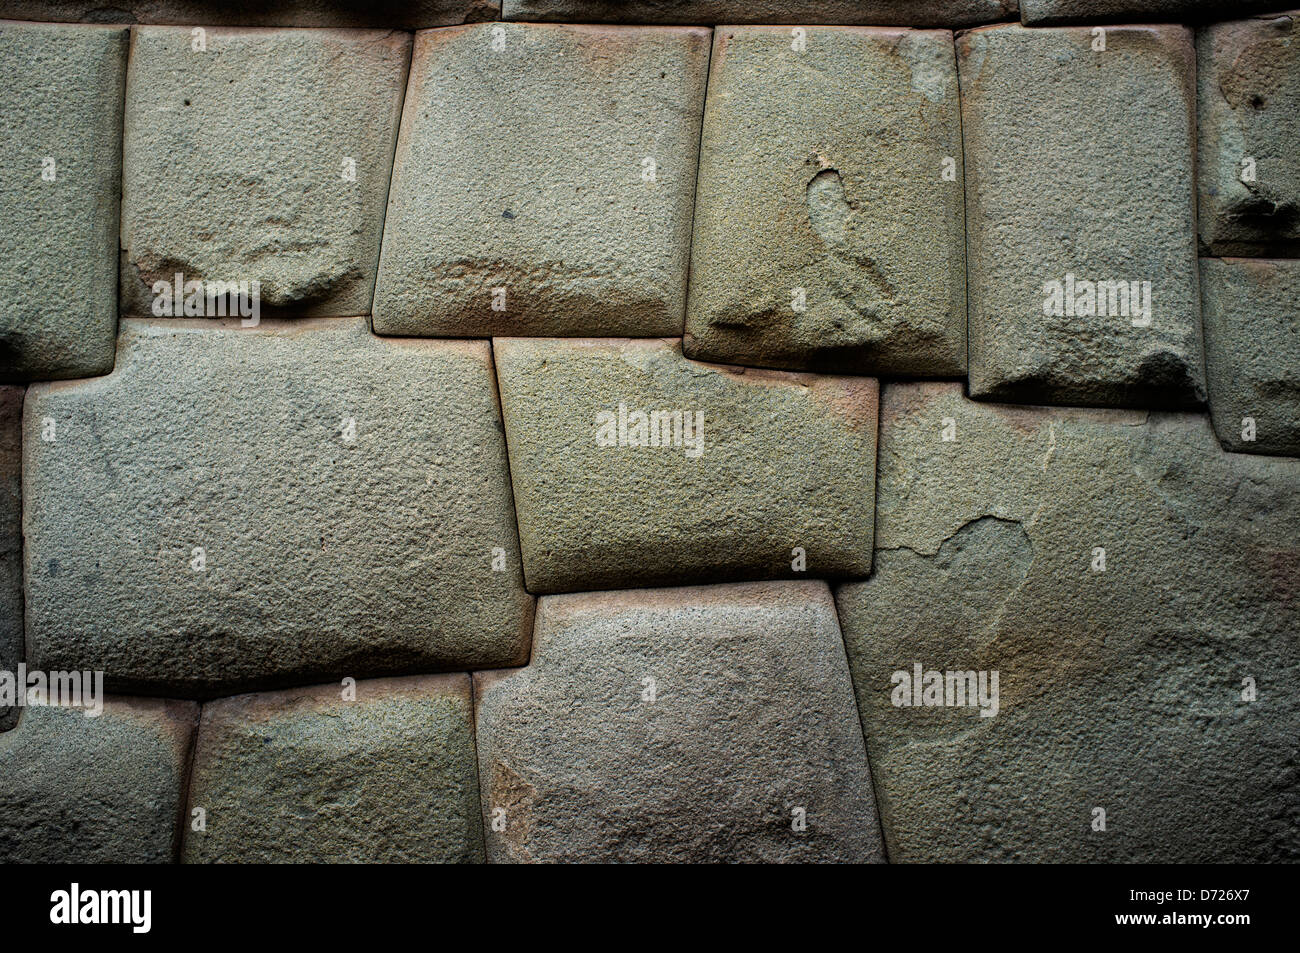 Ancient Incan stonework upon which newer buildings were constructed line many streets of central Cuzco, Peru. Stock Photo